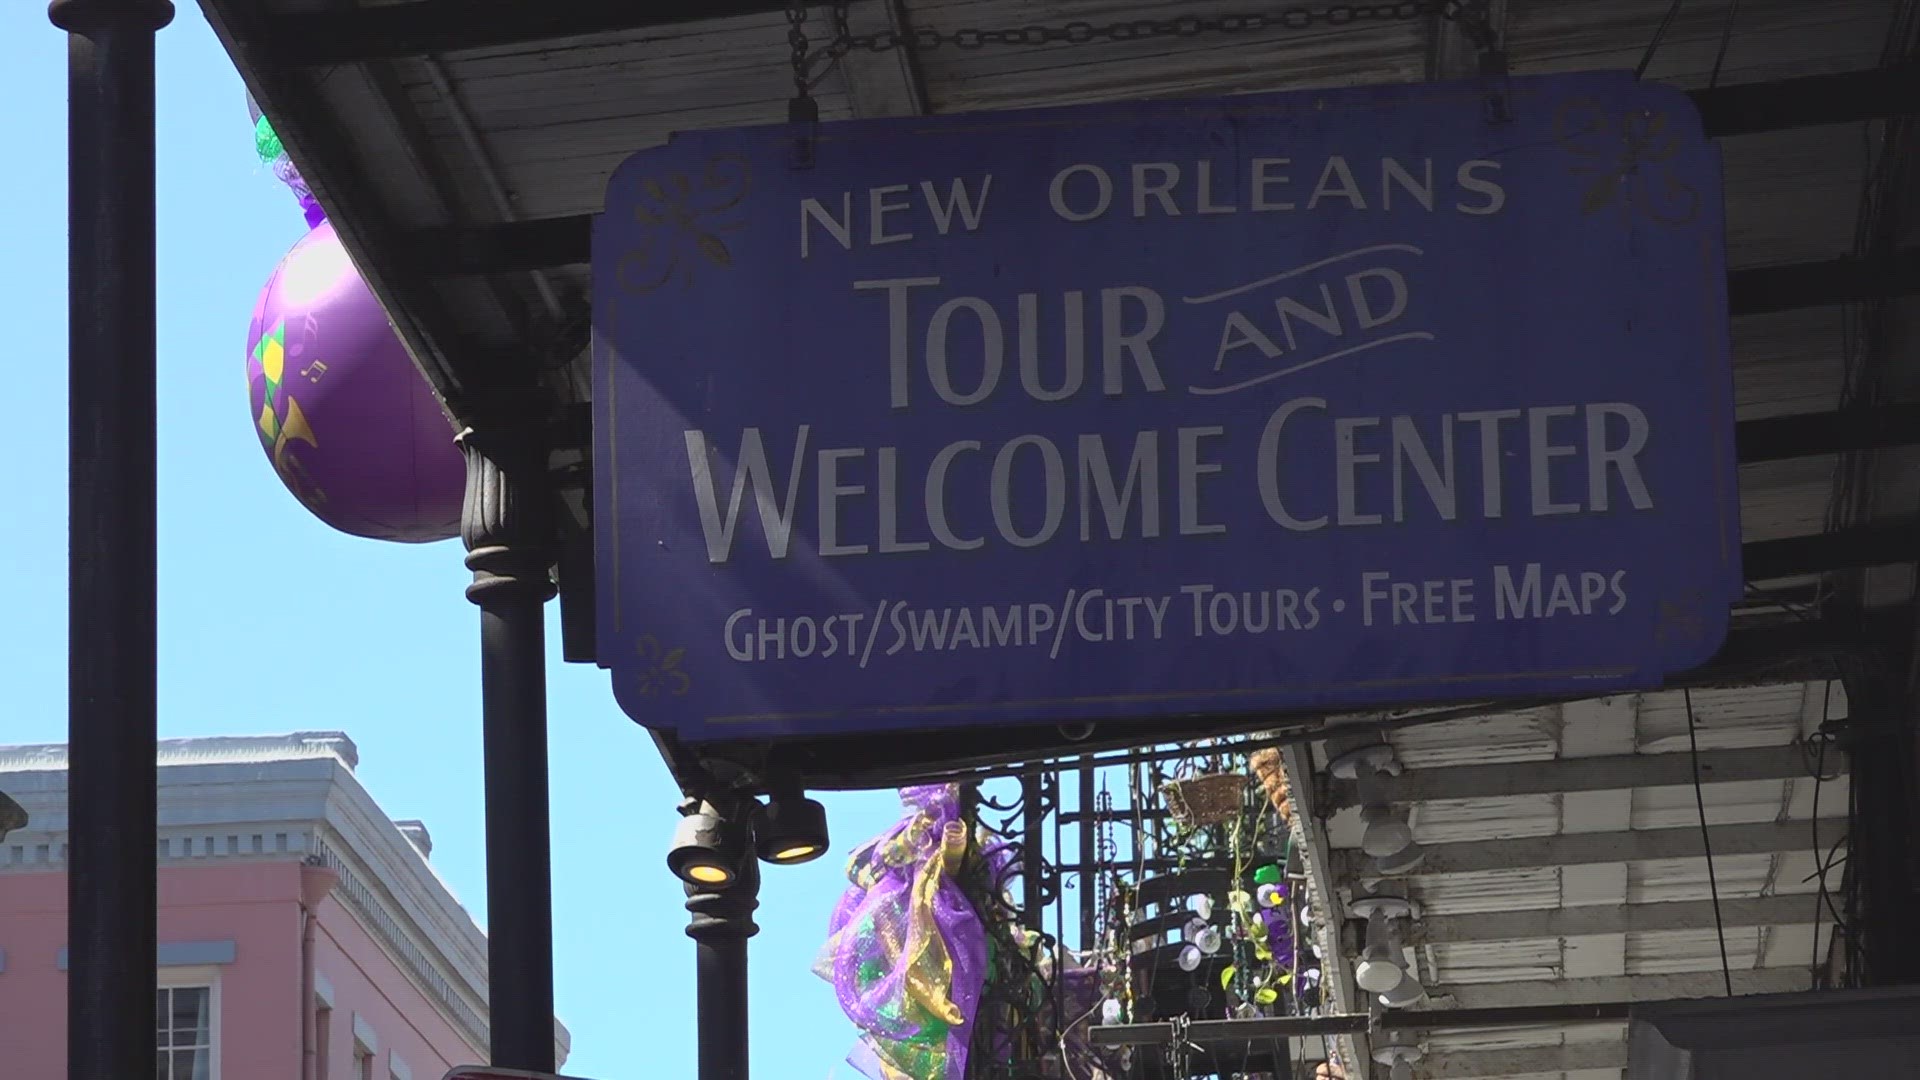 WWL Louisiana's Rachel Handley sat in on a tour guide class to find out what it takes.